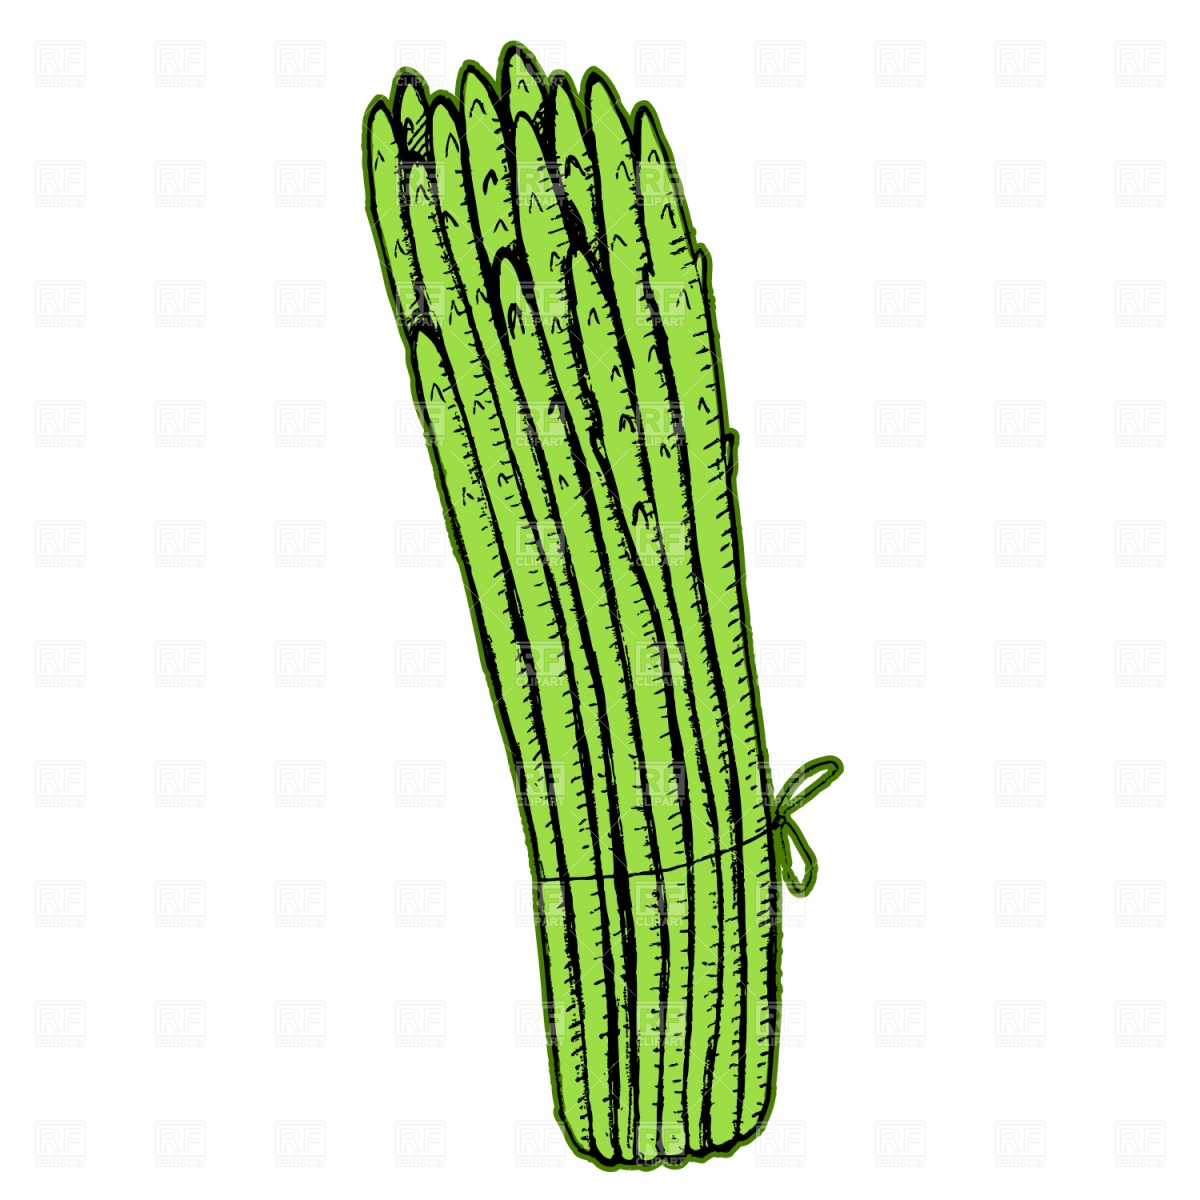 Asparagus 1540 Food And Beverages Download Royalty Free Vector Clip